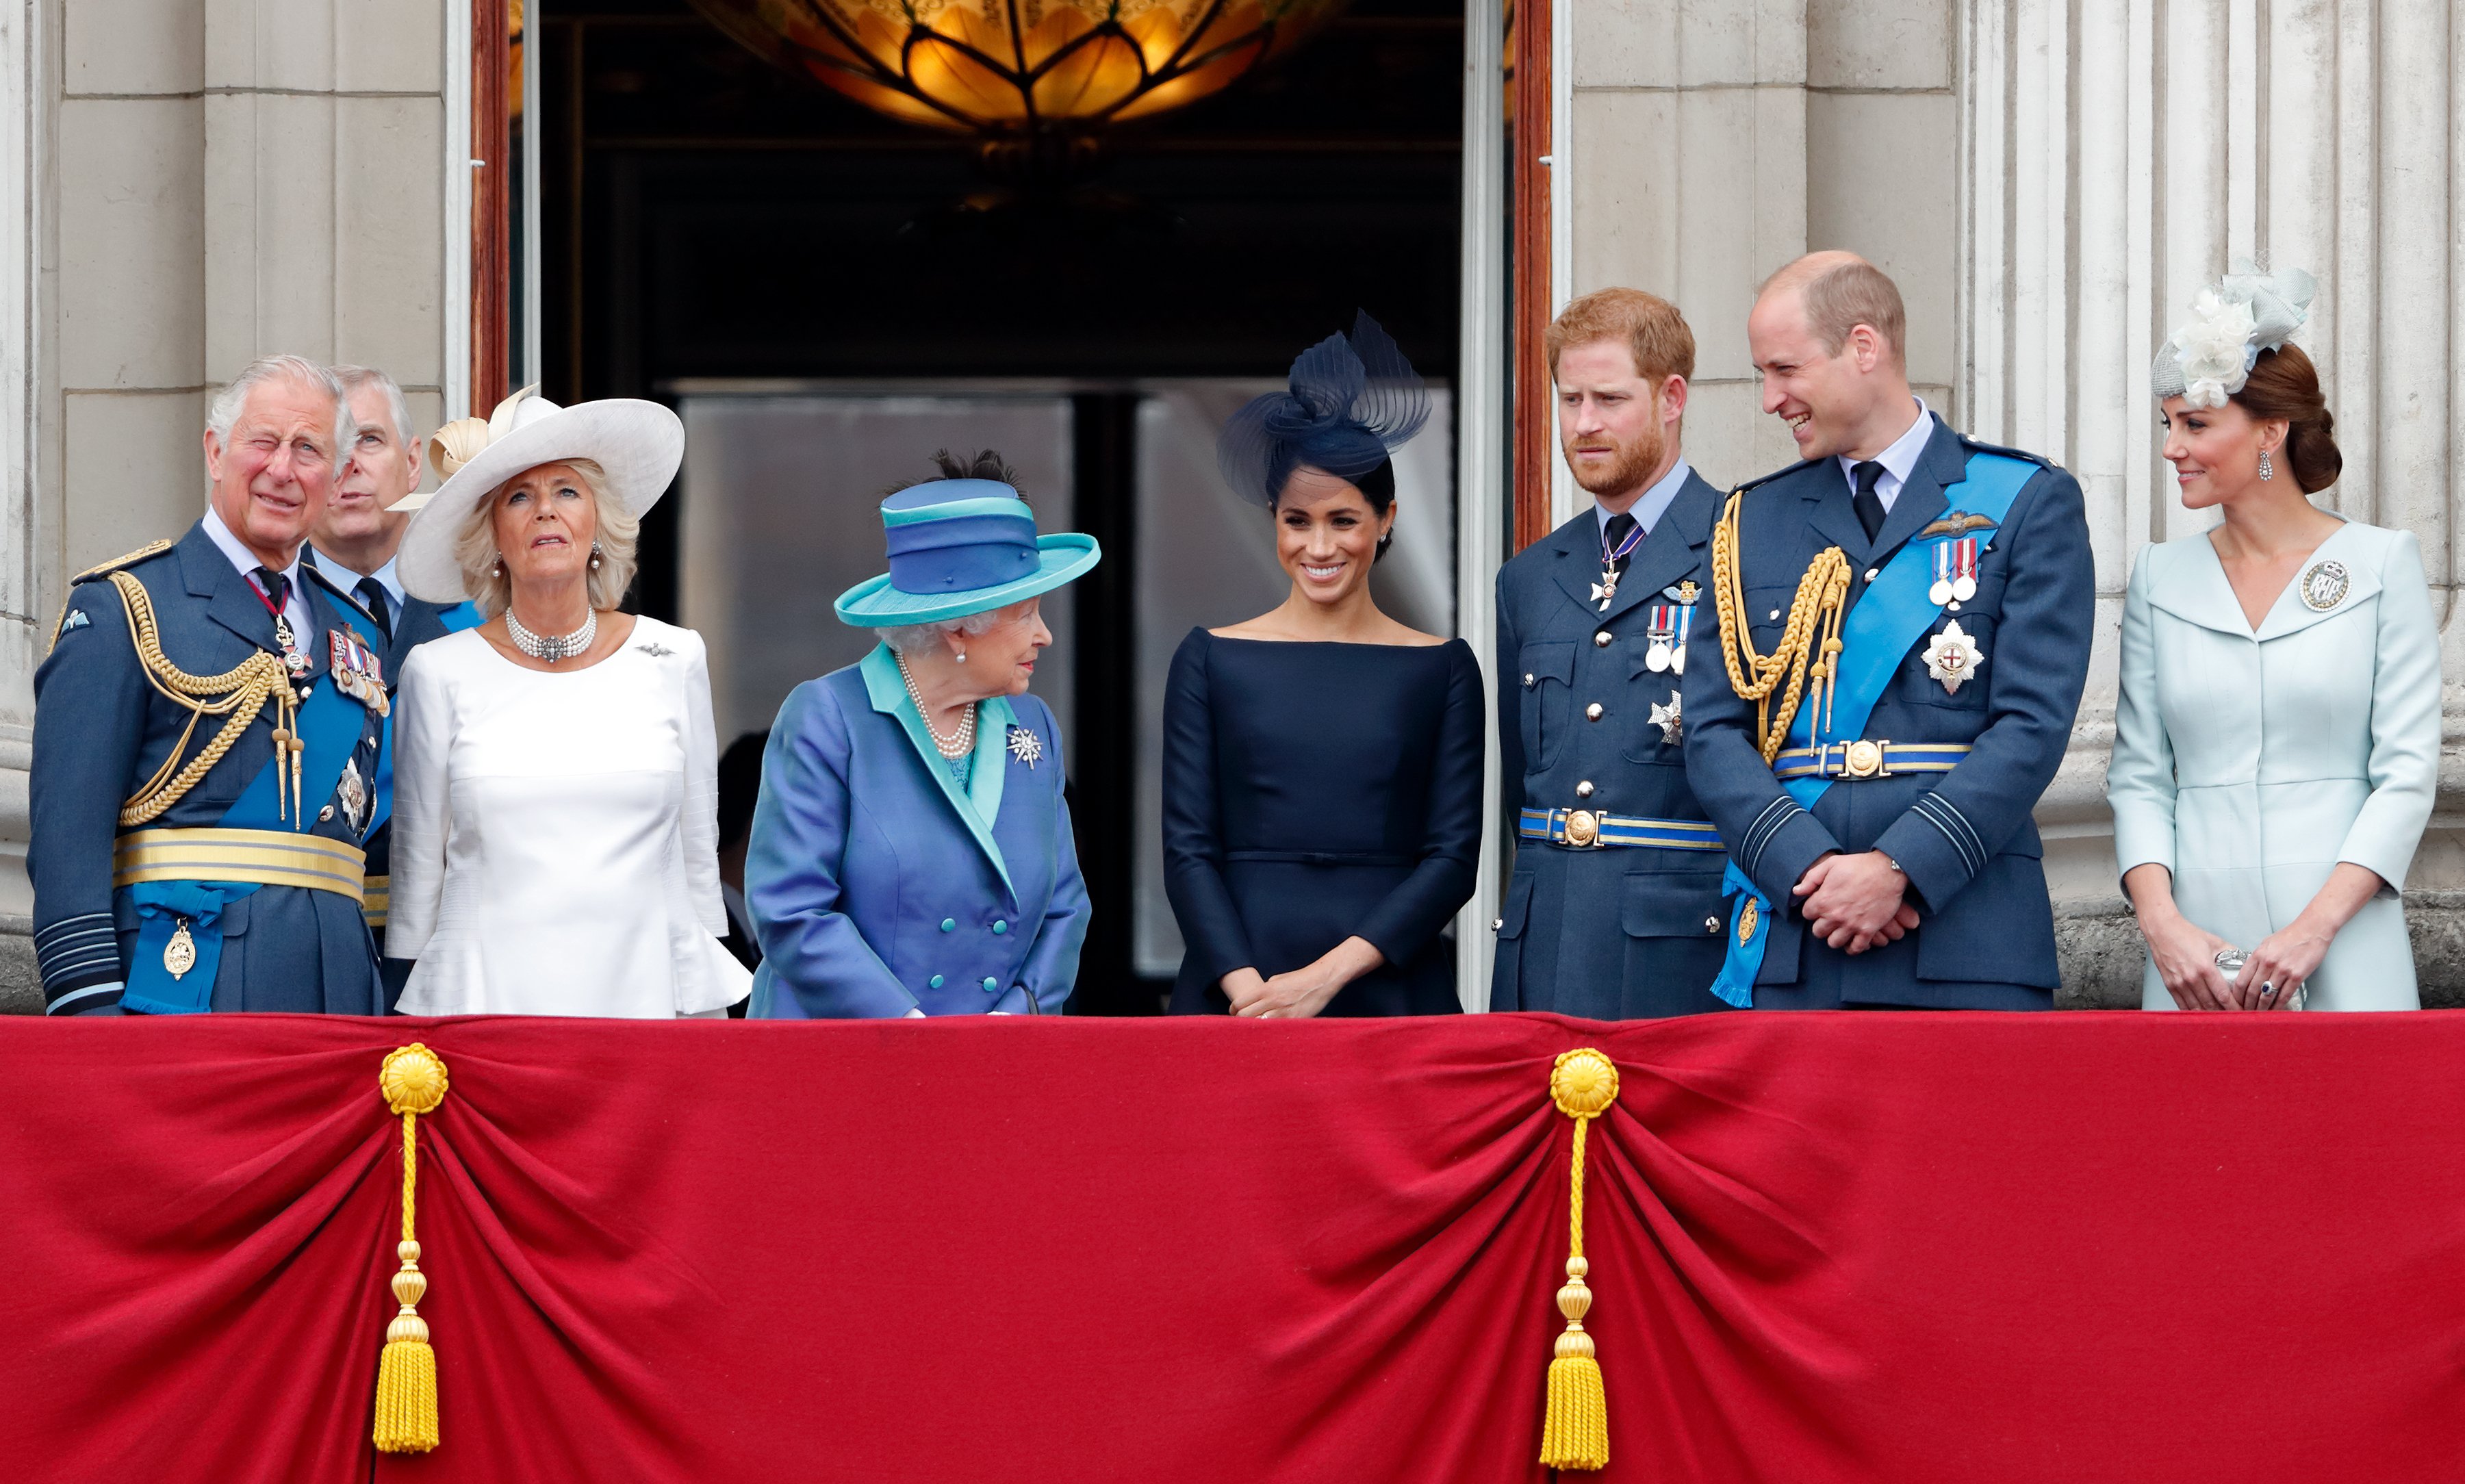 Prince Charles, Duchess Camilla, Queen Elizabeth II, Duchess Meghan, Prince Harry, Prince William, and Duchess Kate watch a flypast to mark the centenary of the Royal Air Force on July 10, 2018, in London, England. | Source: Getty Images